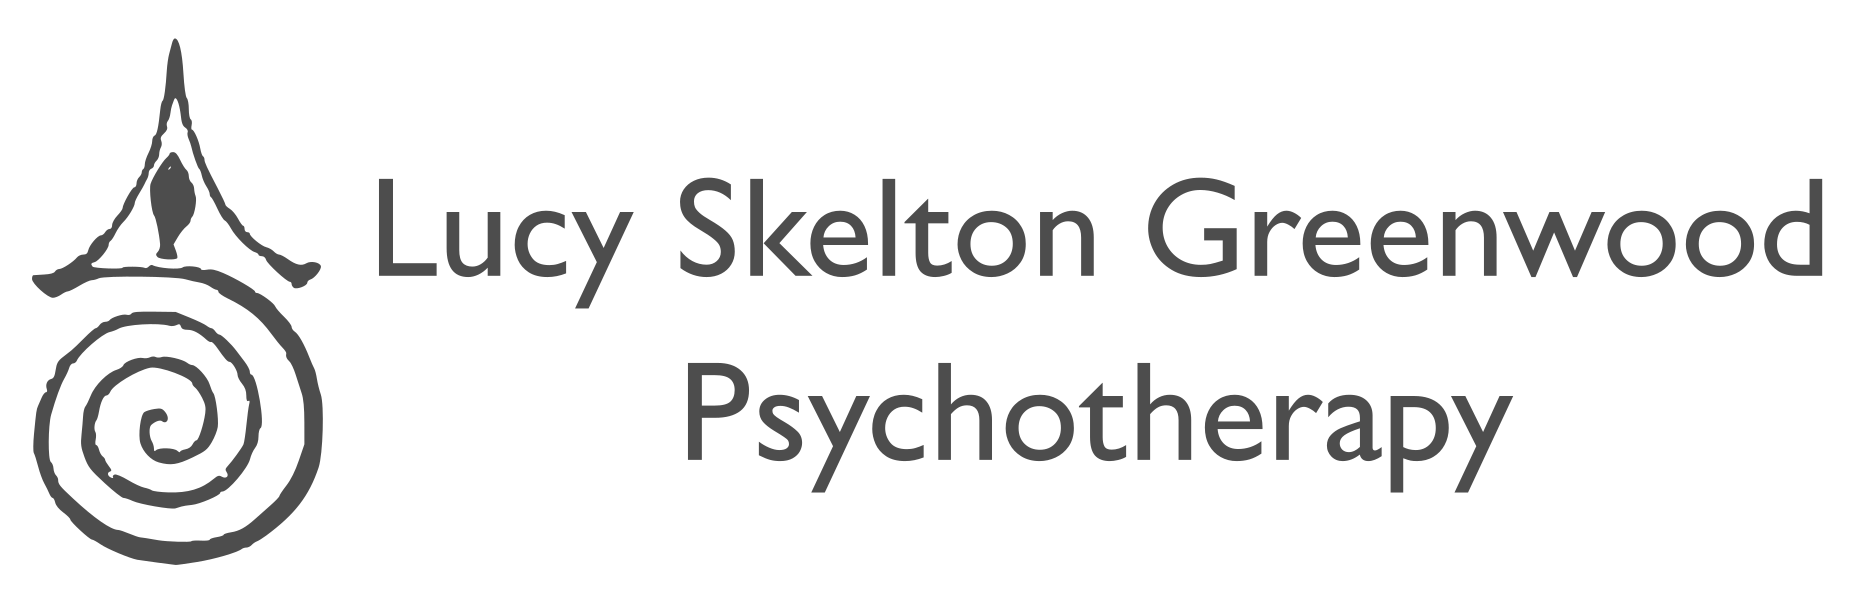 Lucy Skelton Greenwood Psychotherapy